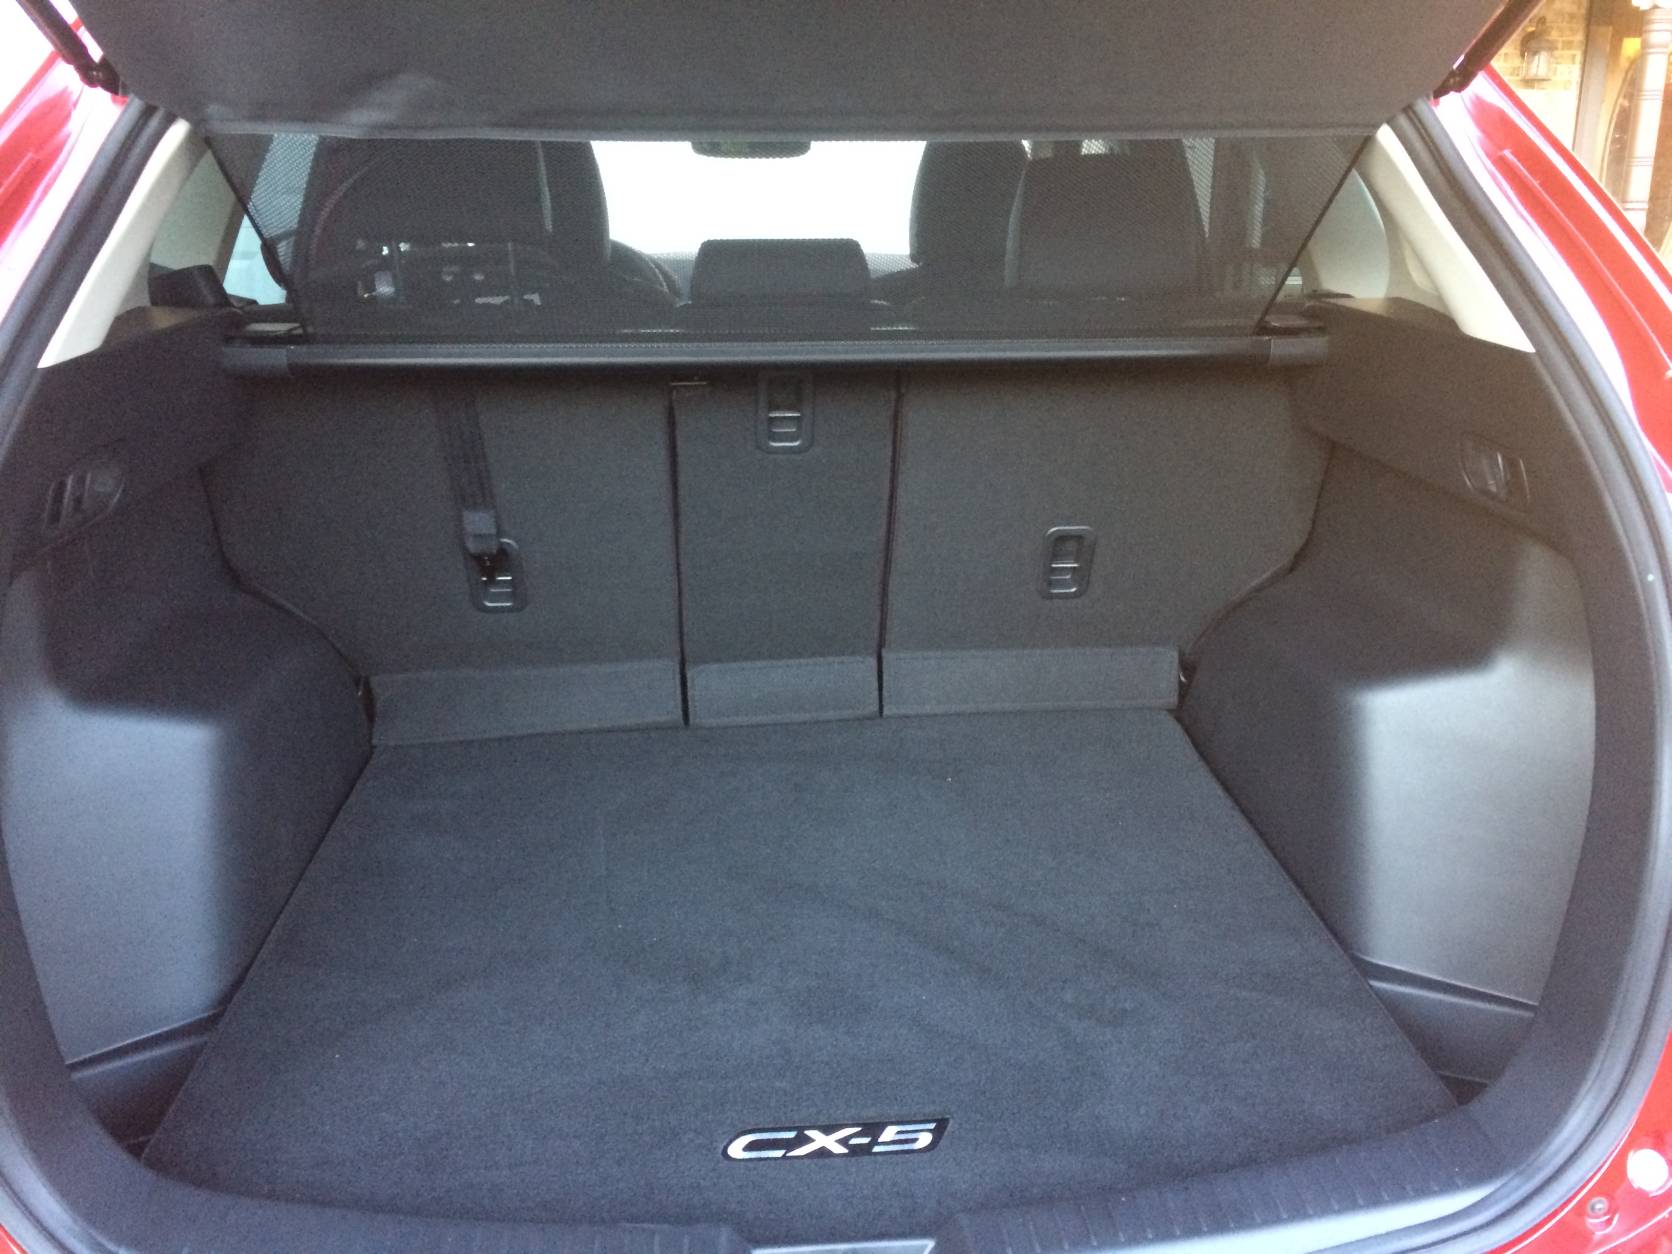 Cargo space is ample, and the rear seats fold nearly flat, adding to the utility of this Mazda. (WTOP/Mike Parris)